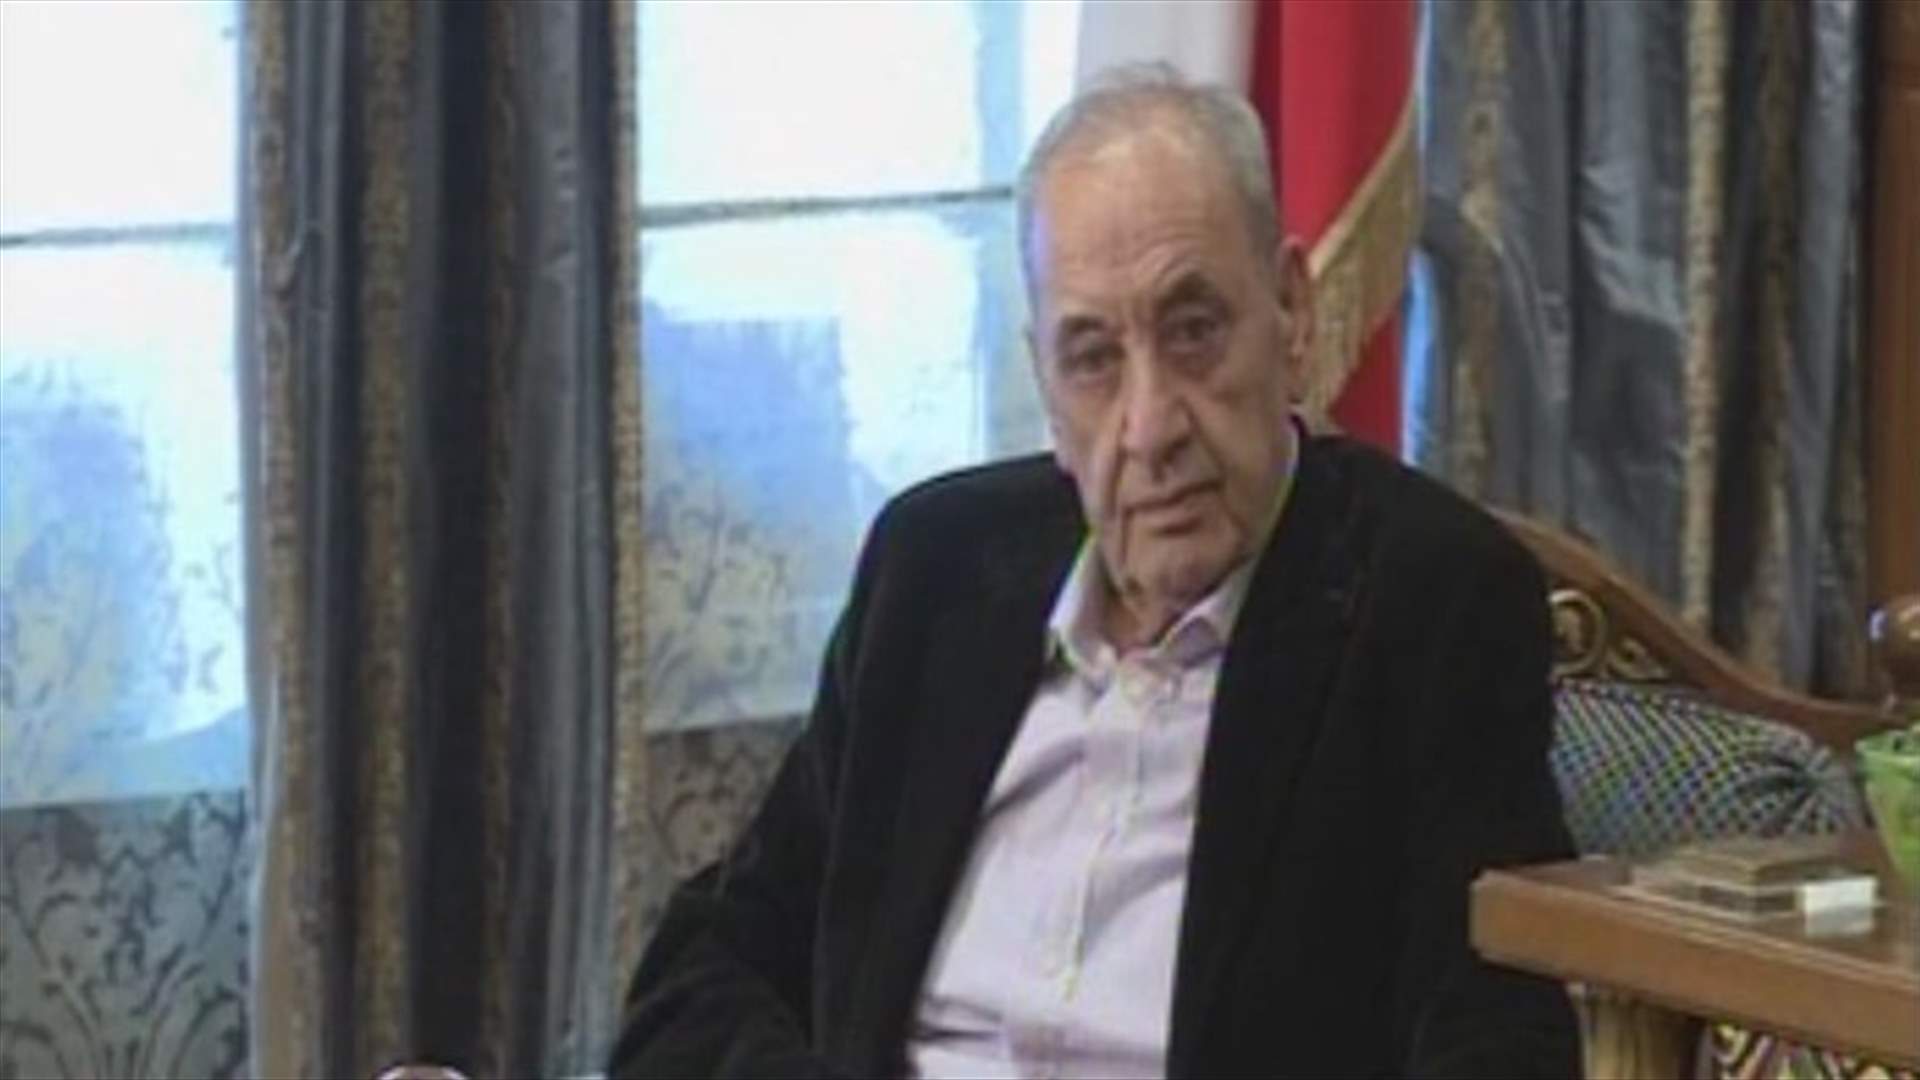 Speaker Berri says will call for legislative session following next dialogue session